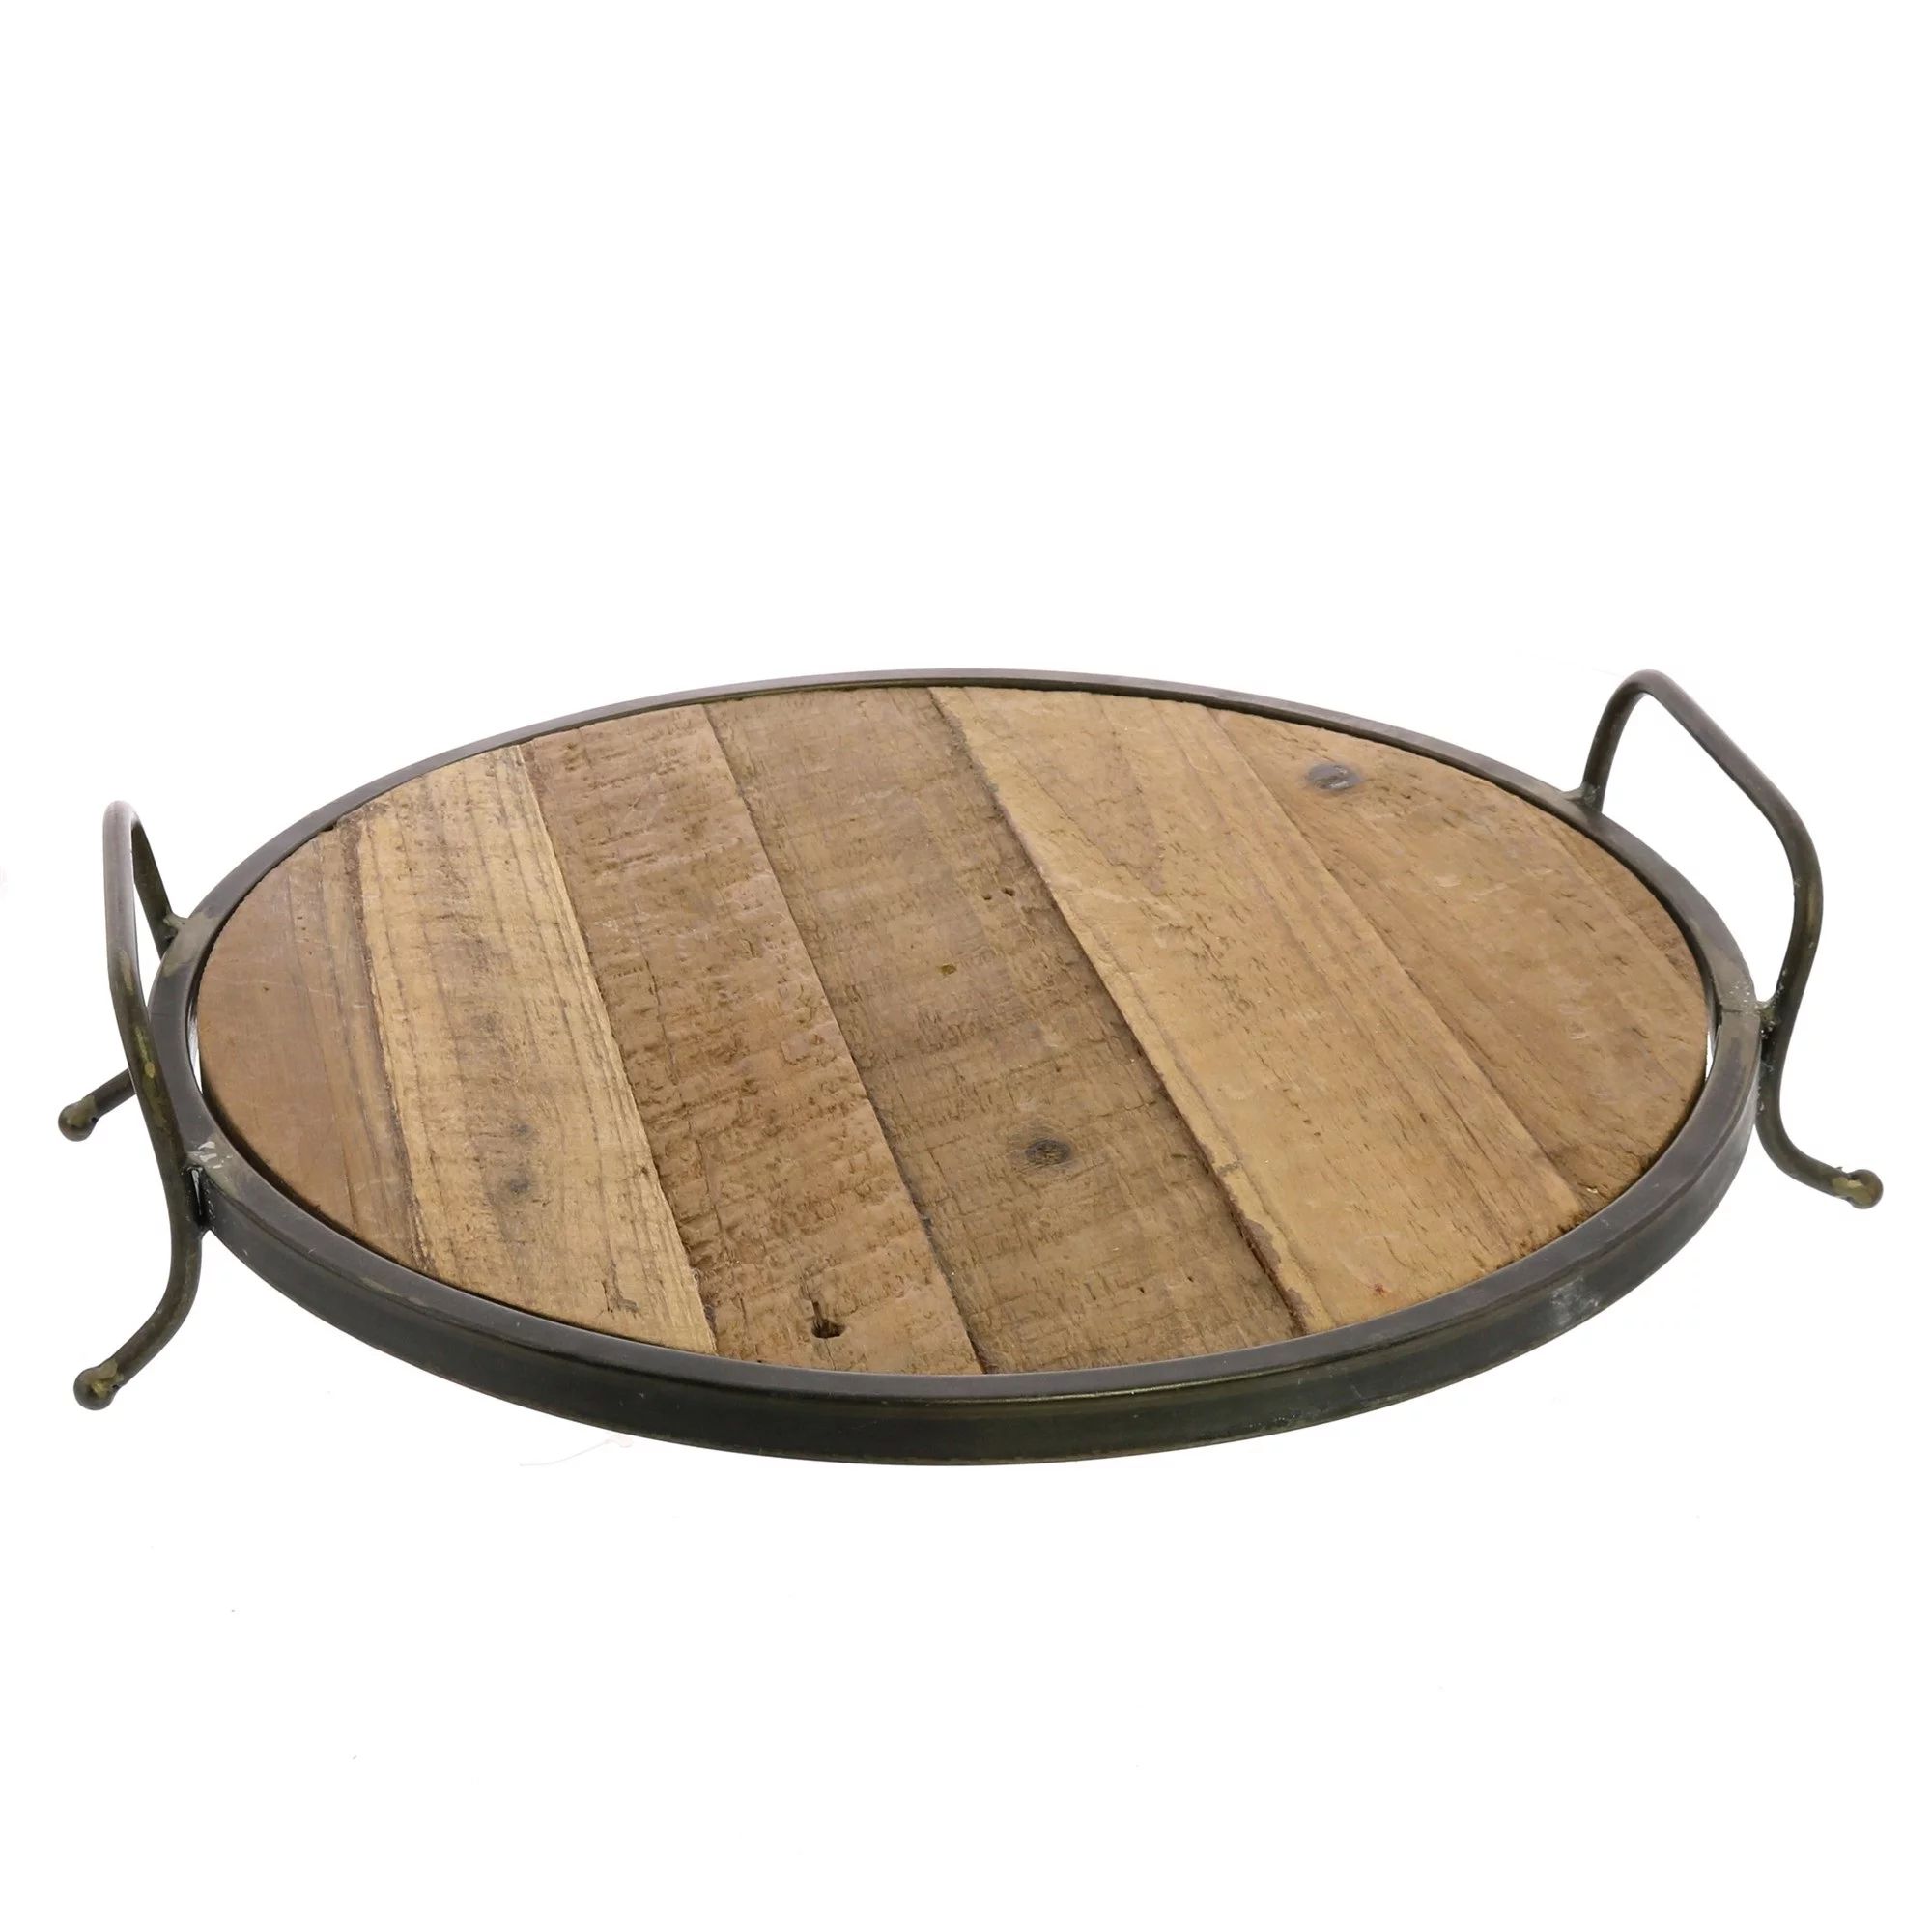 Wood and Metal Round Tray with Sturdy Handles, Black and Brown | Walmart (US)